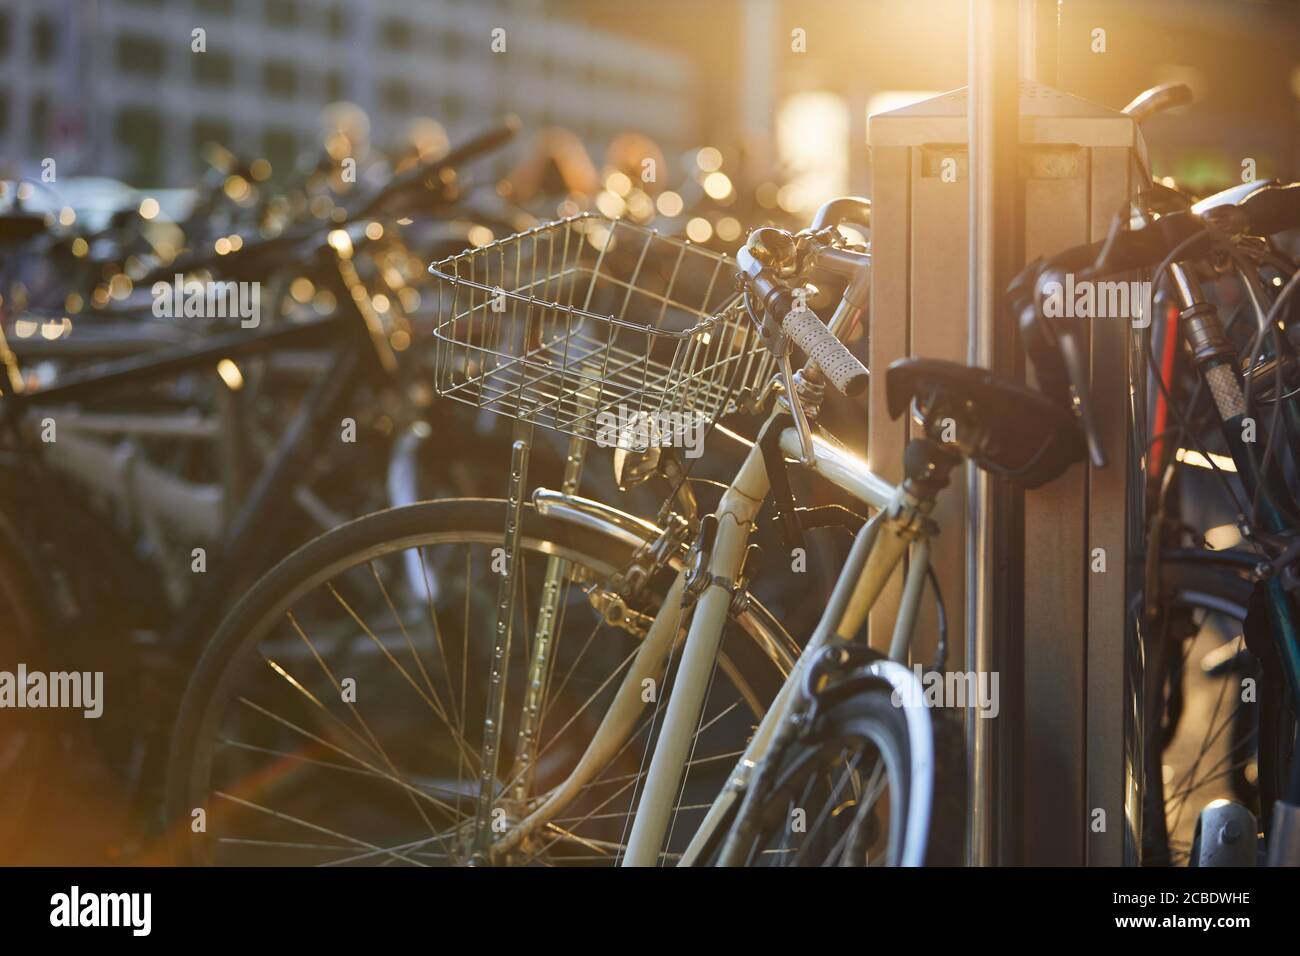 Public bicycle parking at city street at sunset. Zurich, Switzerland. Stock Photo